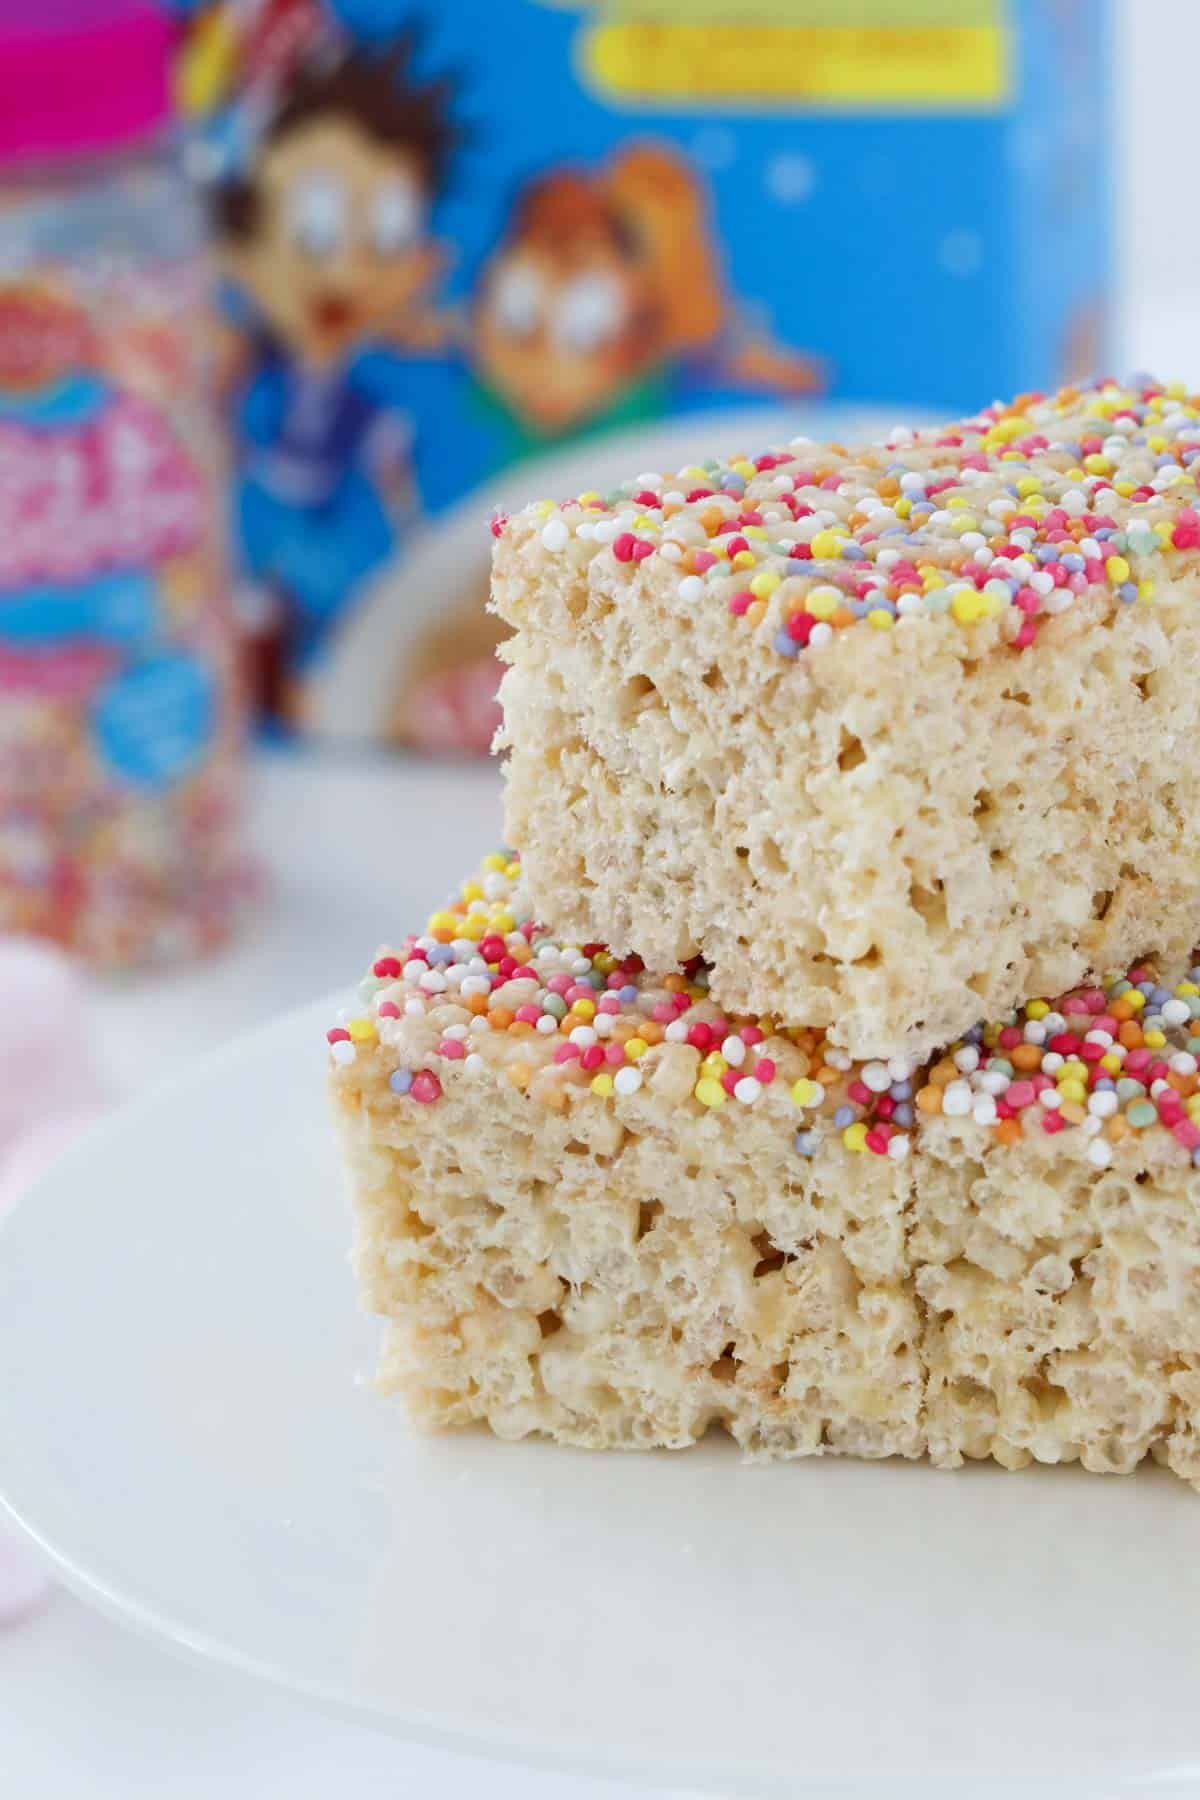 Homemade LCM bars with sprinkles on top in front of a packet of rice bubbles.